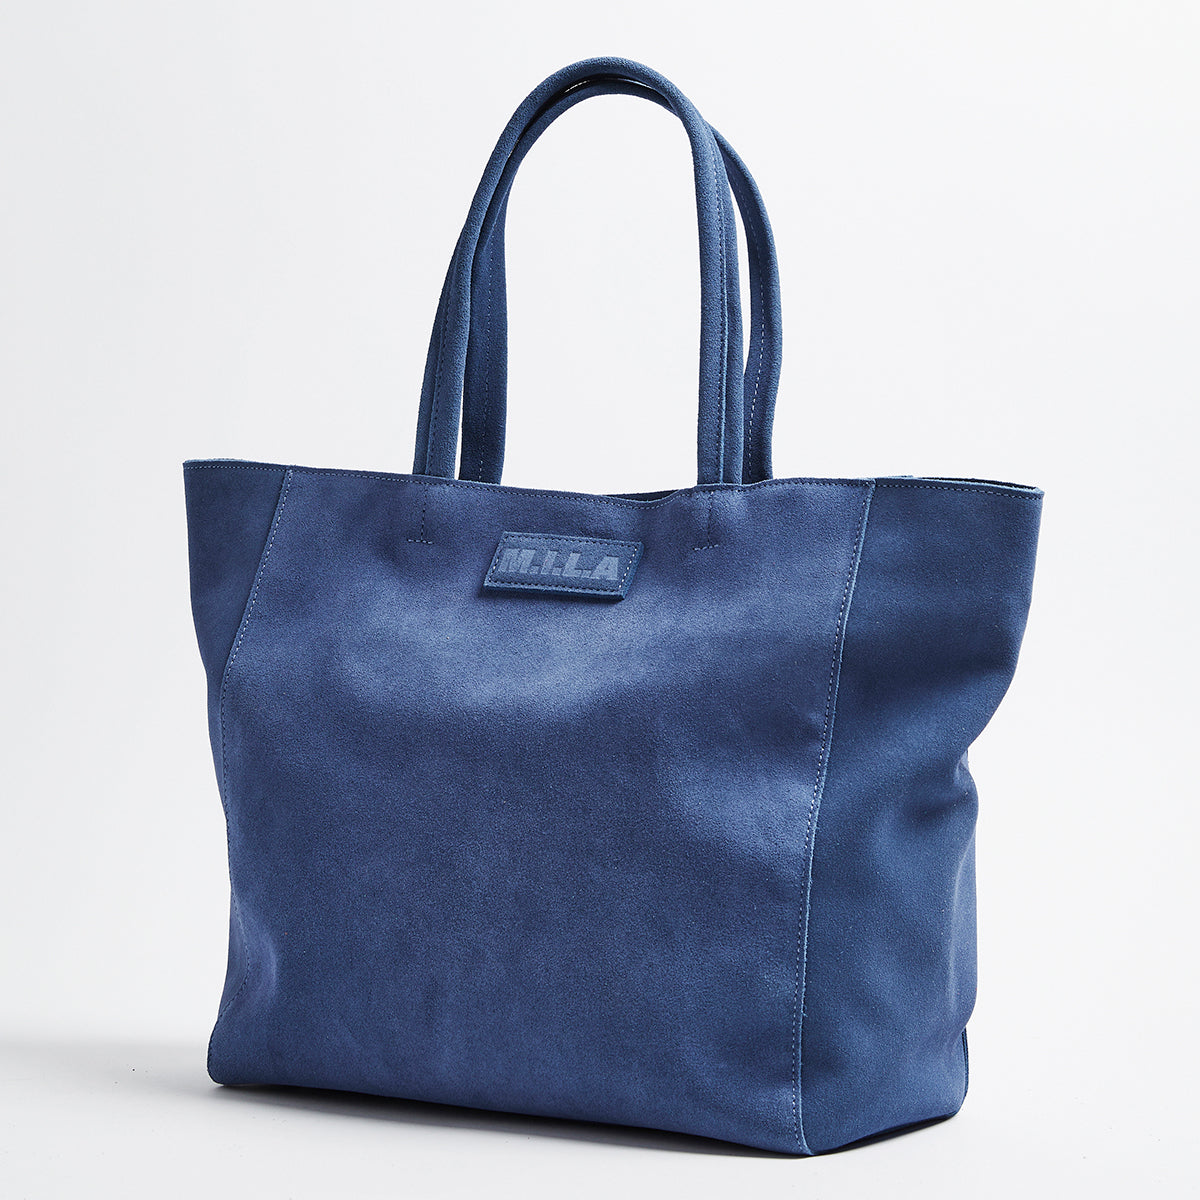 Luxury Tote Bag Suede  Camel – M.I.L.A. made in Los Angeles